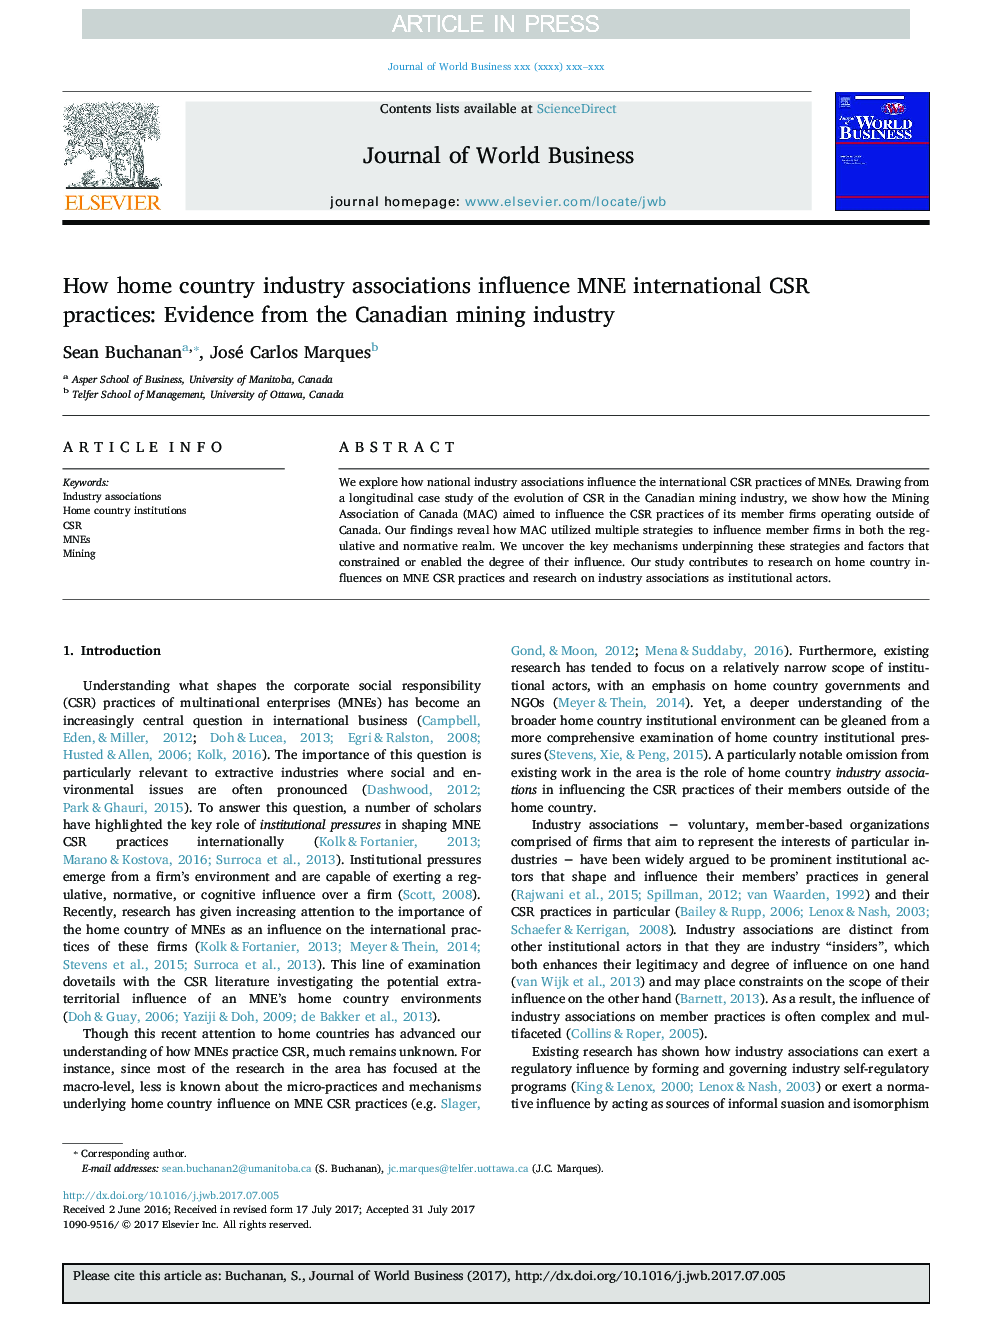 How home country industry associations influence MNE international CSR practices: Evidence from the Canadian mining industry